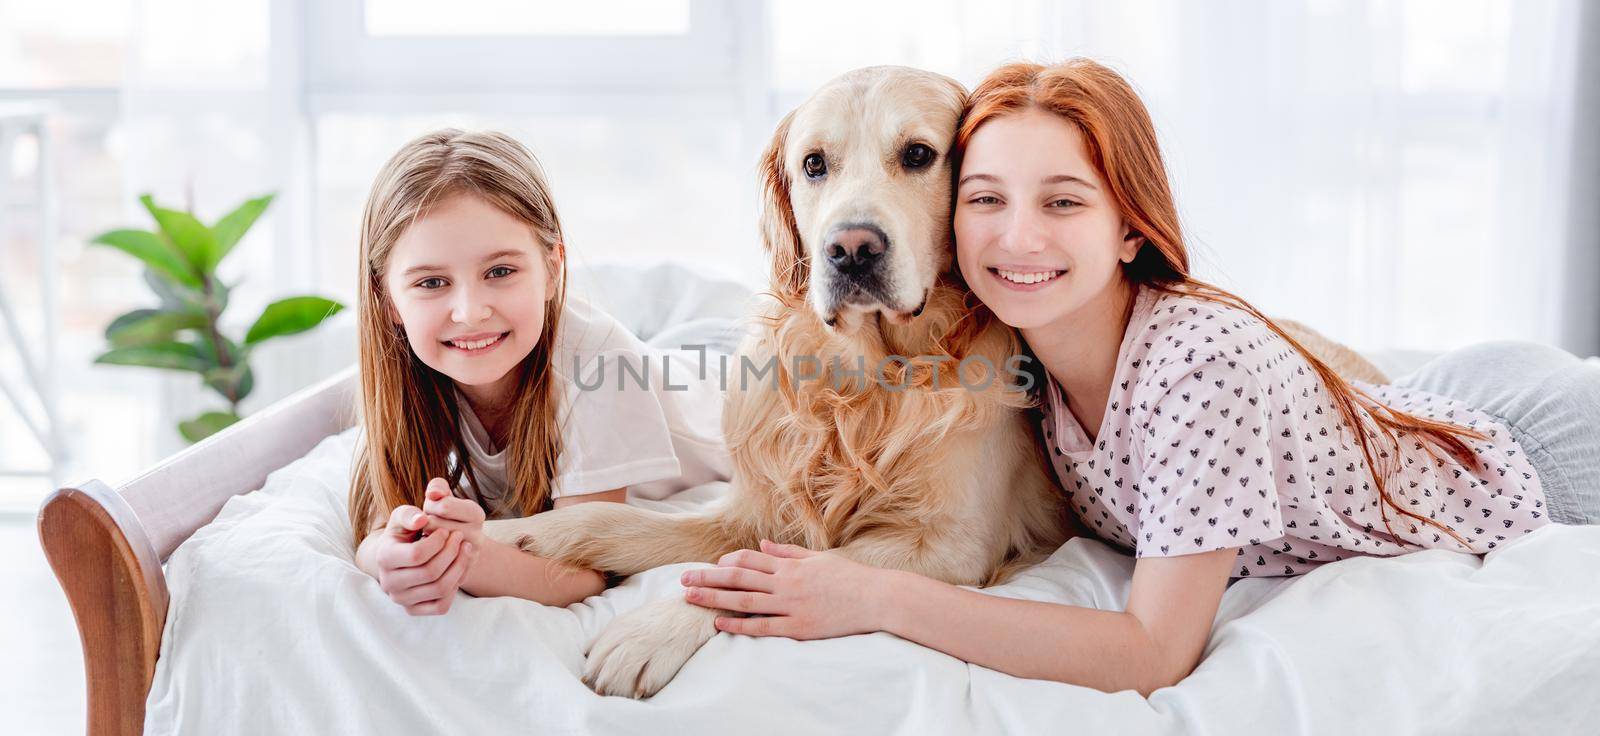 Girls with golden retriever dog in the bed by tan4ikk1